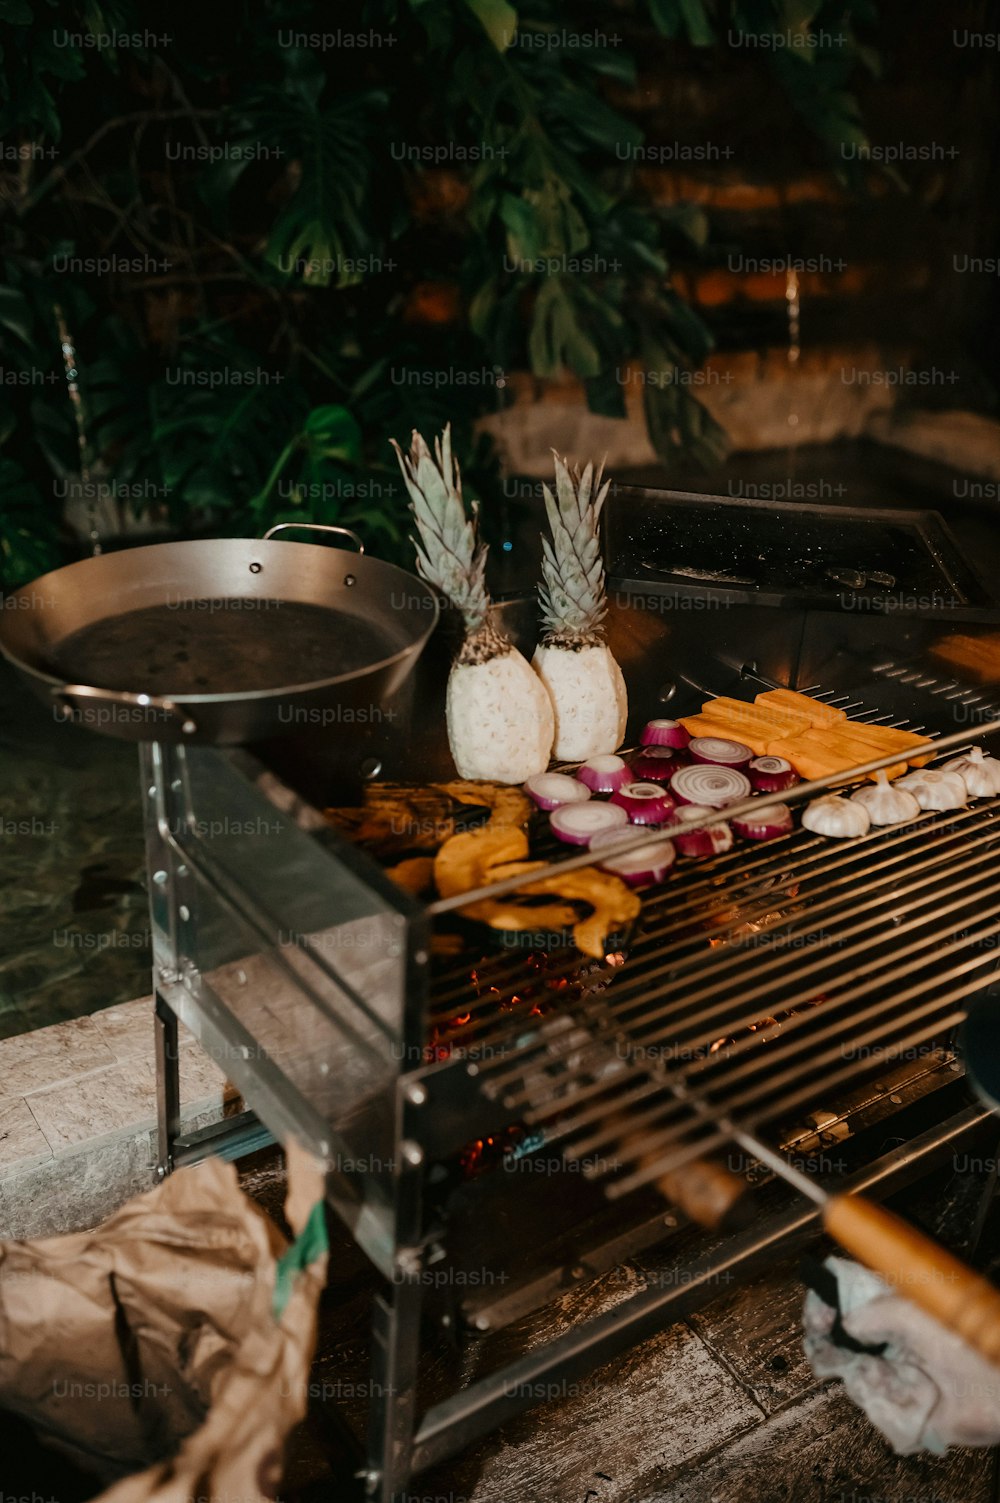 a grill with onions, onions, and pineapples cooking on it